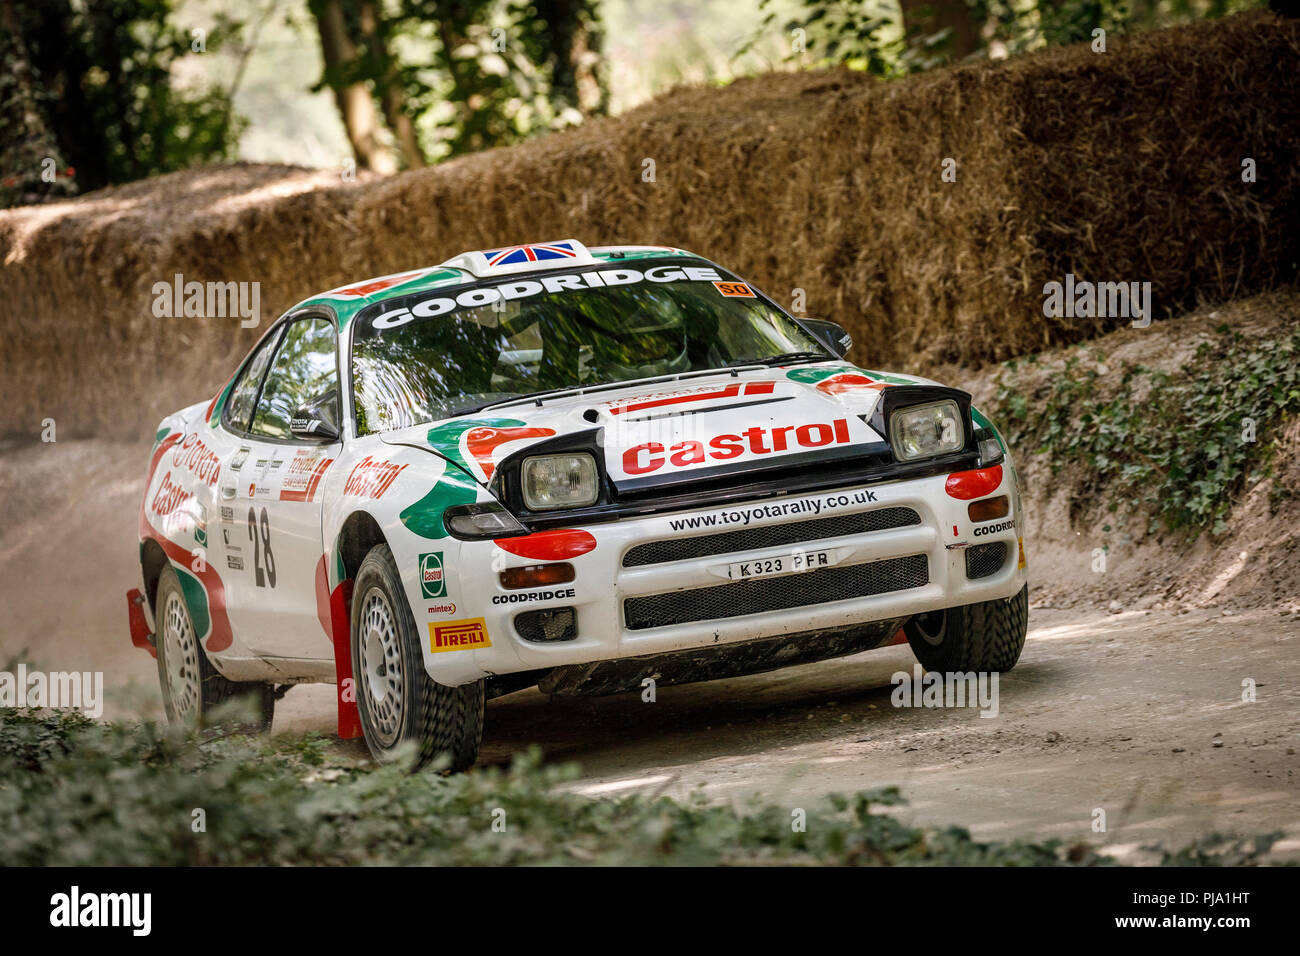 1992 Toyota Celica GT-Four ST185 WRC with driver Gary Le Coadou on the forest rally stage at the 2018 Goodwood Festival of Speed, Sussex, UK. Stock Photo